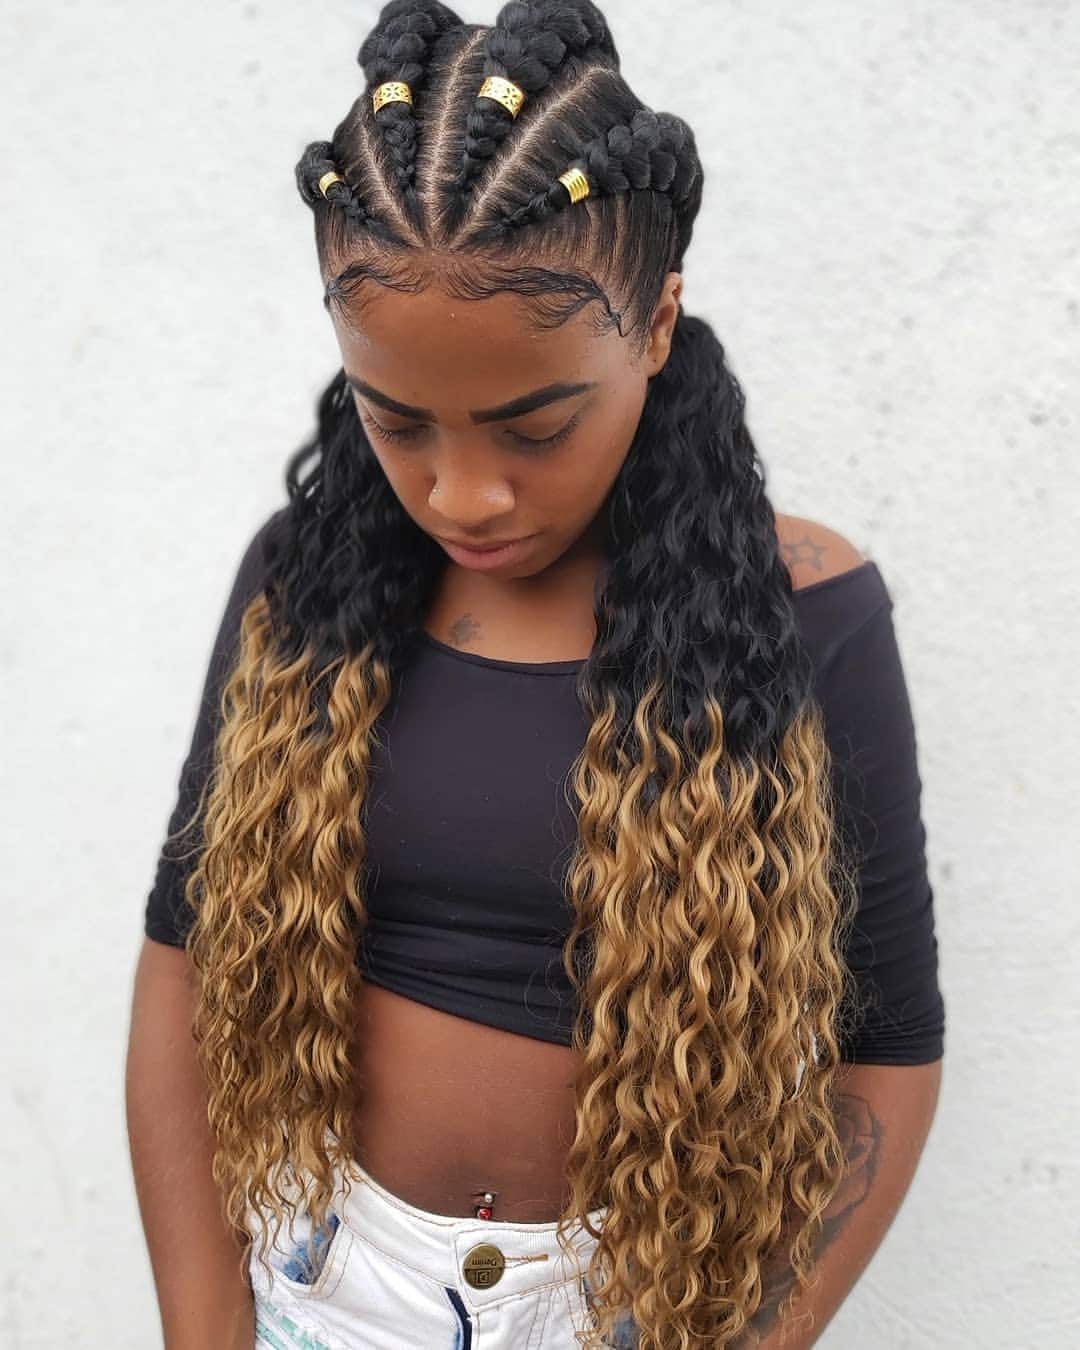 10 Braided Hairstyles For Black Women That Are Trending Now  Grazia